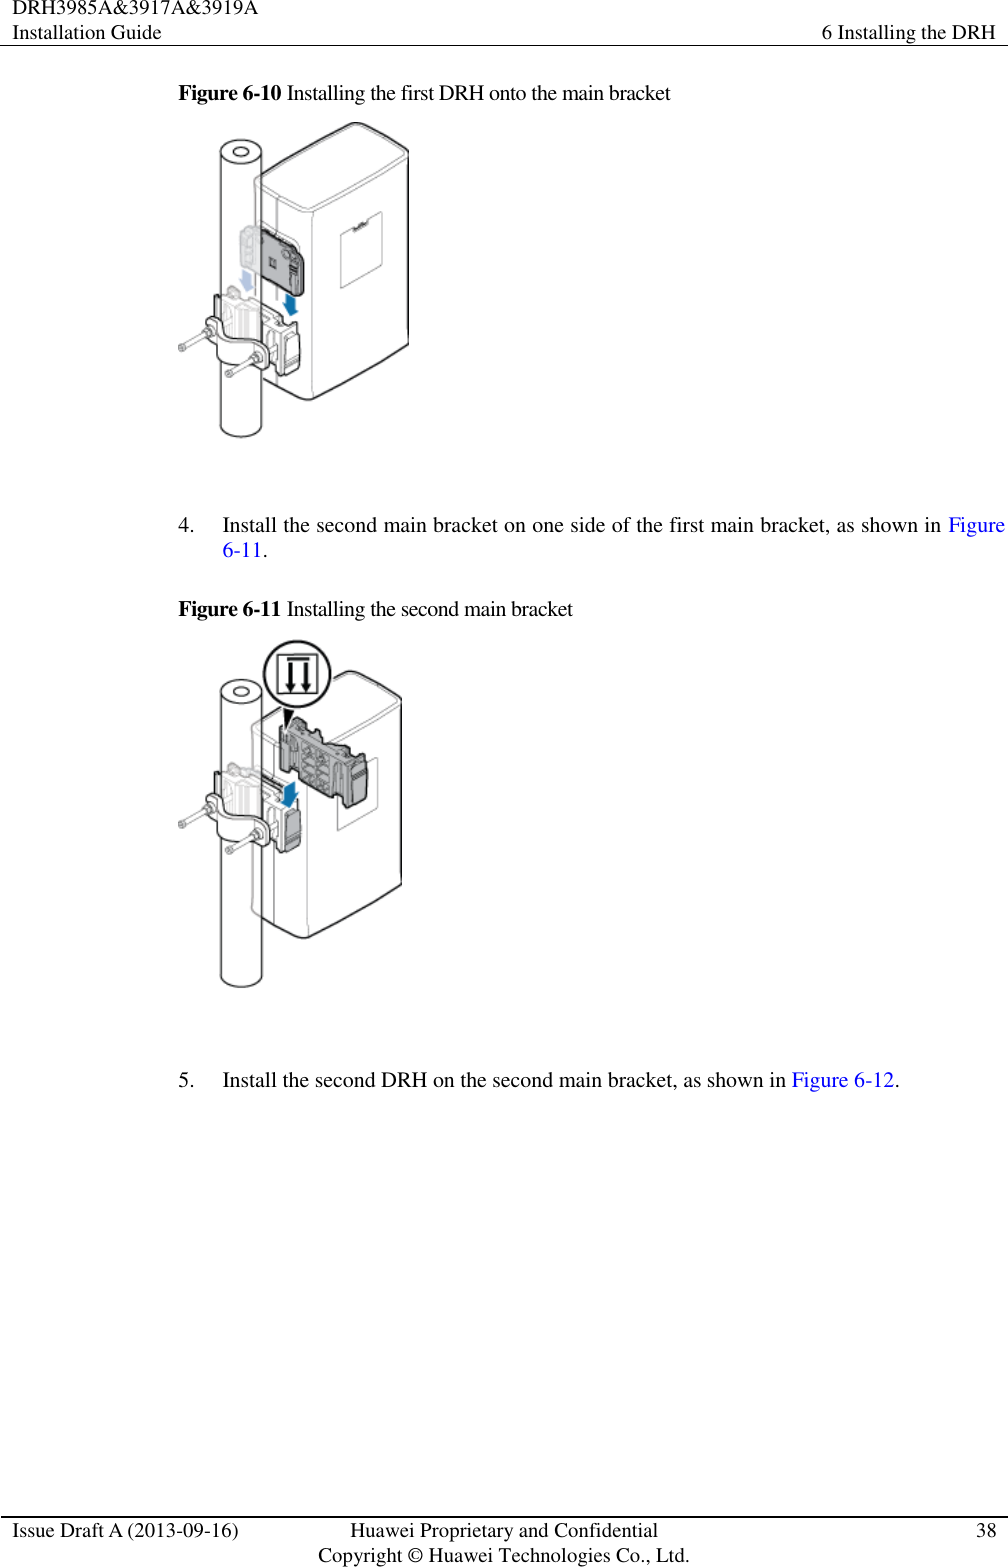 DRH3985A&amp;3917A&amp;3919A Installation Guide 6 Installing the DRH  Issue Draft A (2013-09-16) Huawei Proprietary and Confidential                                     Copyright © Huawei Technologies Co., Ltd. 38  Figure 6-10 Installing the first DRH onto the main bracket   4. Install the second main bracket on one side of the first main bracket, as shown in Figure 6-11. Figure 6-11 Installing the second main bracket   5. Install the second DRH on the second main bracket, as shown in Figure 6-12. 